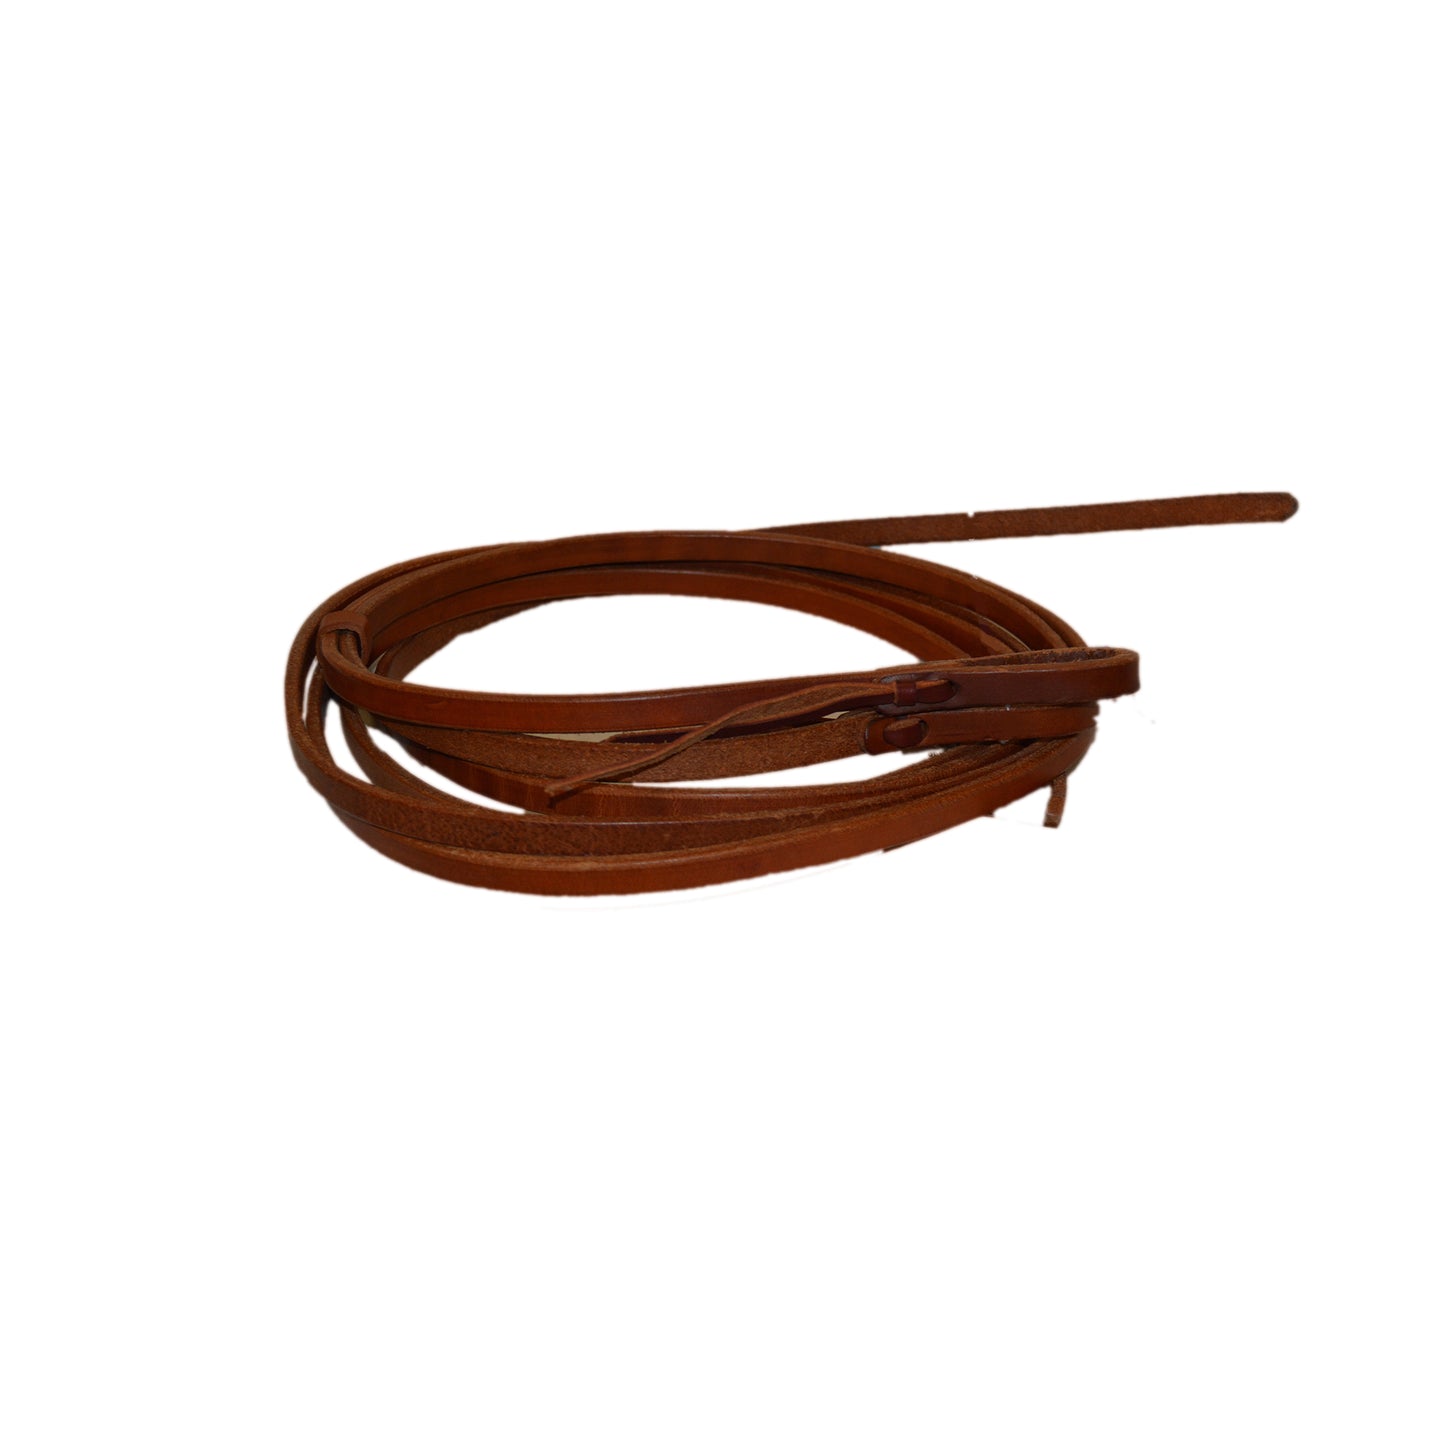 1/2" Split reins oiled harness leather.